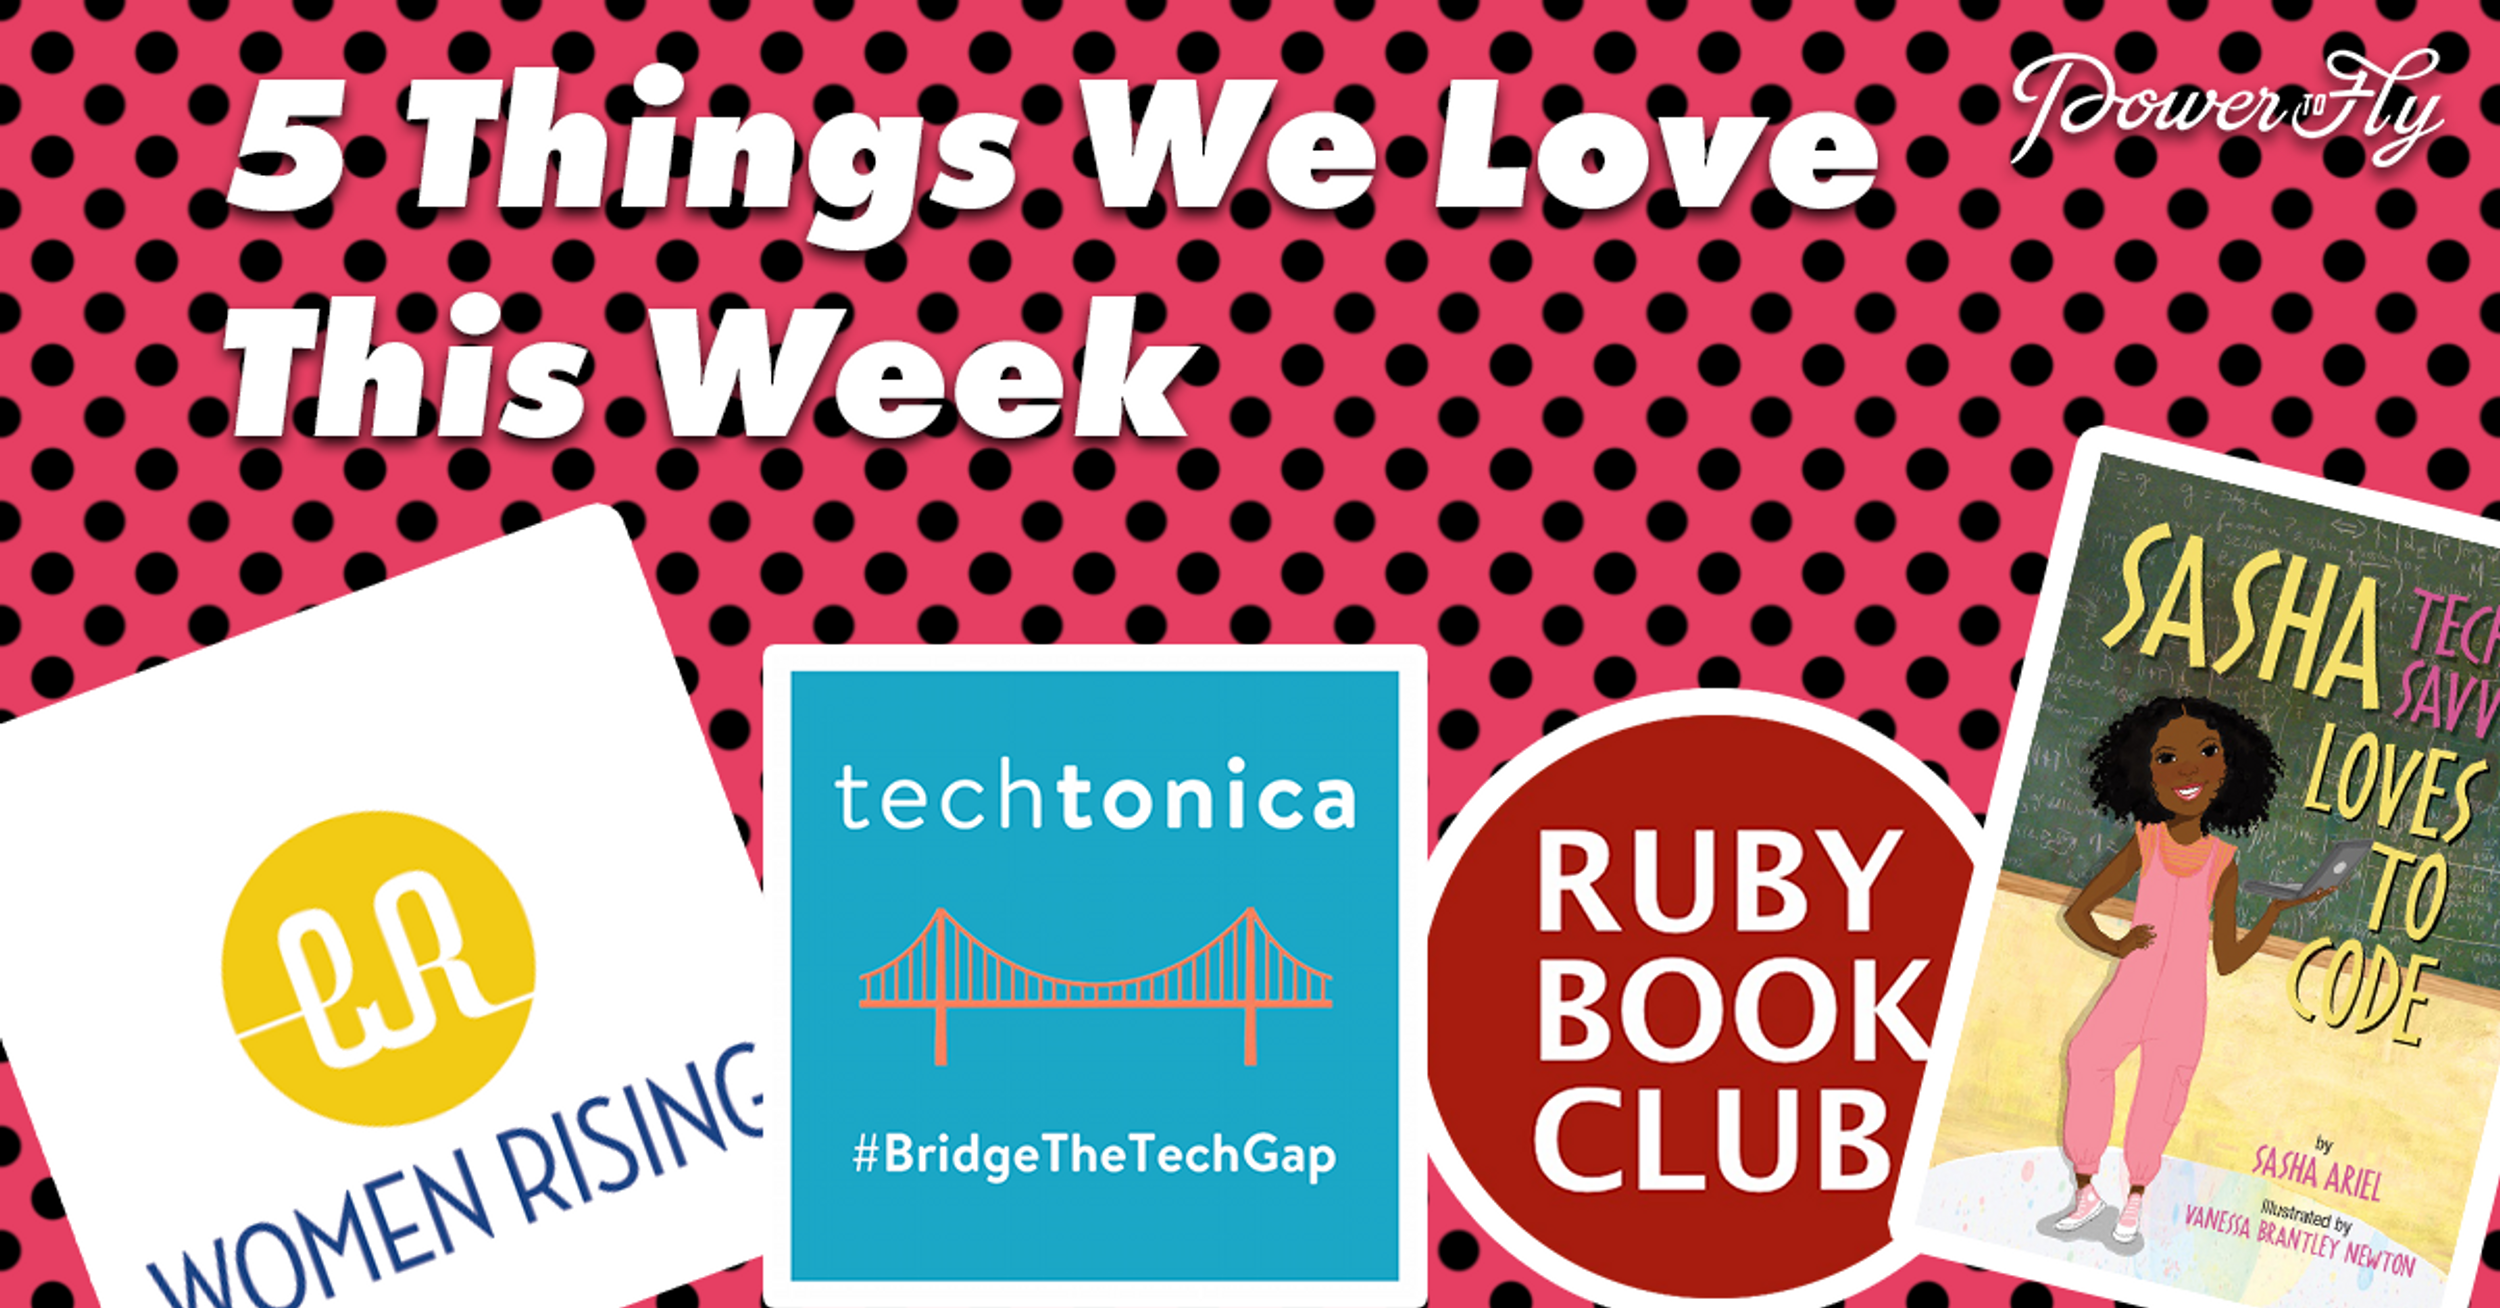 5 Things - Especially For Women In Tech And Digital To Get Ahead -  We Love This Week! June 6, 2017